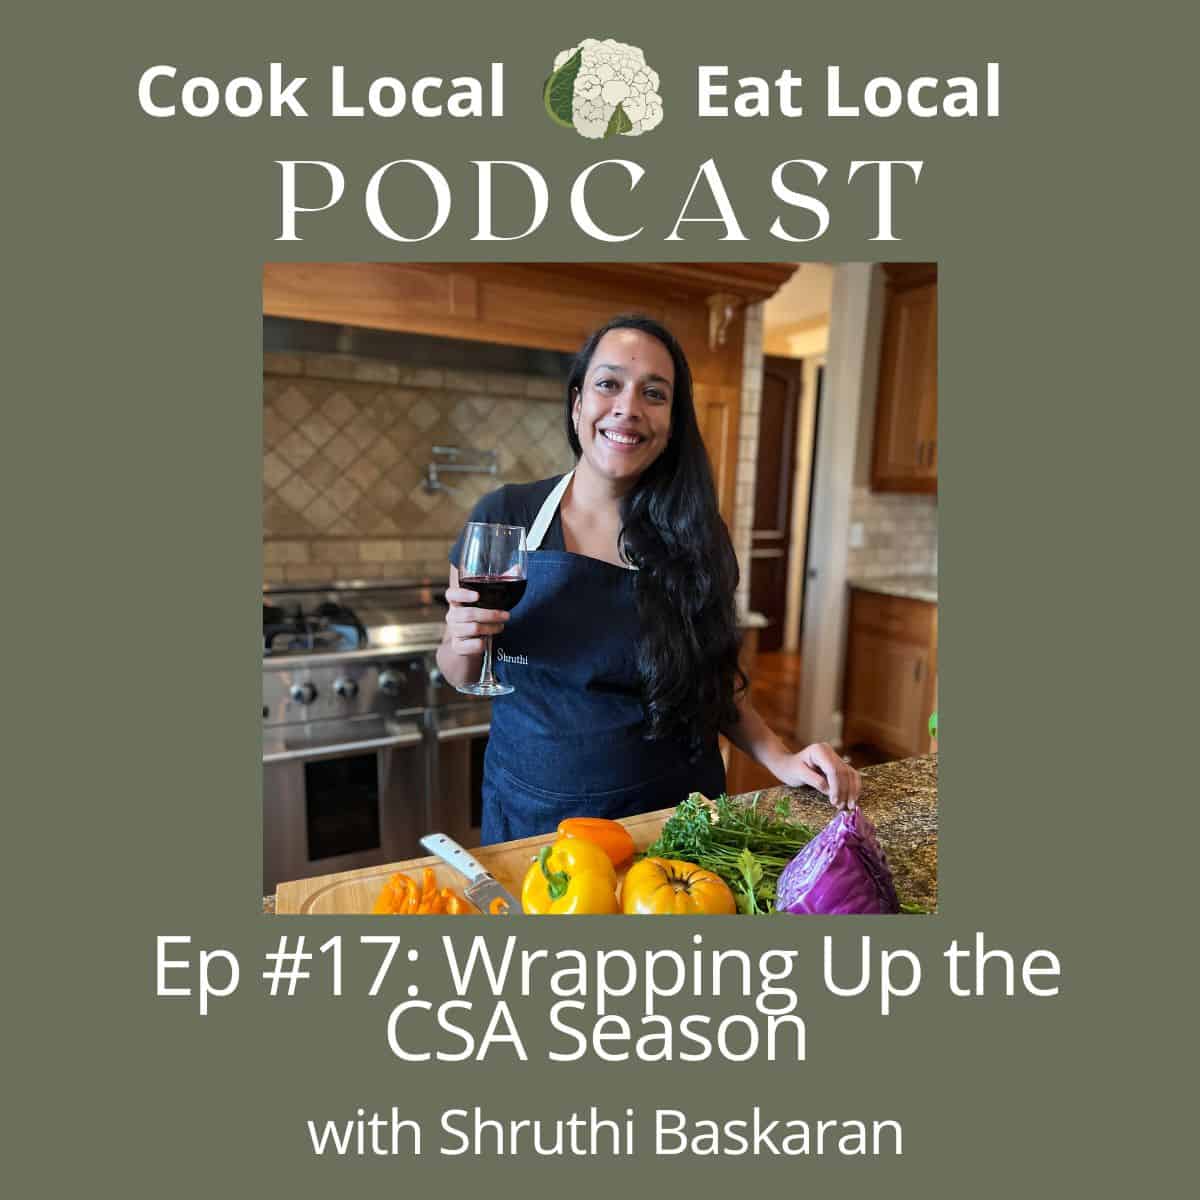 Cook Local Eat Local podcast cover with a photo of guest Shruthi Baskaran, and text with the title "Wrapping Up the CSA Season". 